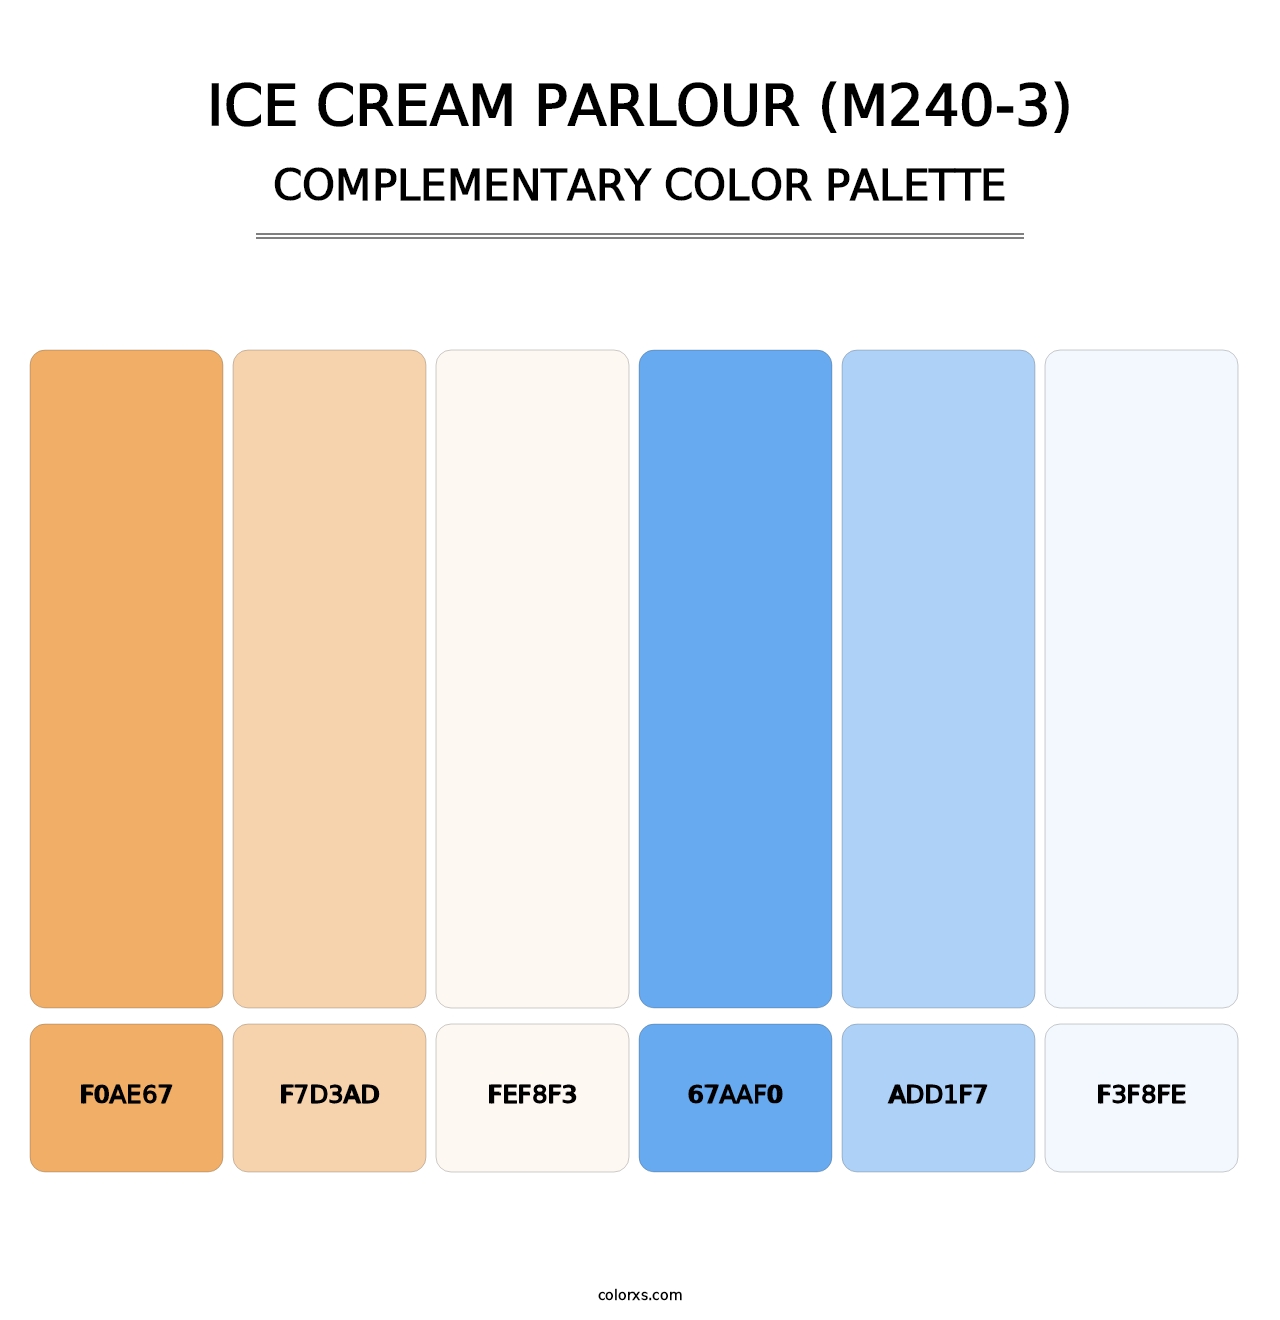 Ice Cream Parlour (M240-3) - Complementary Color Palette